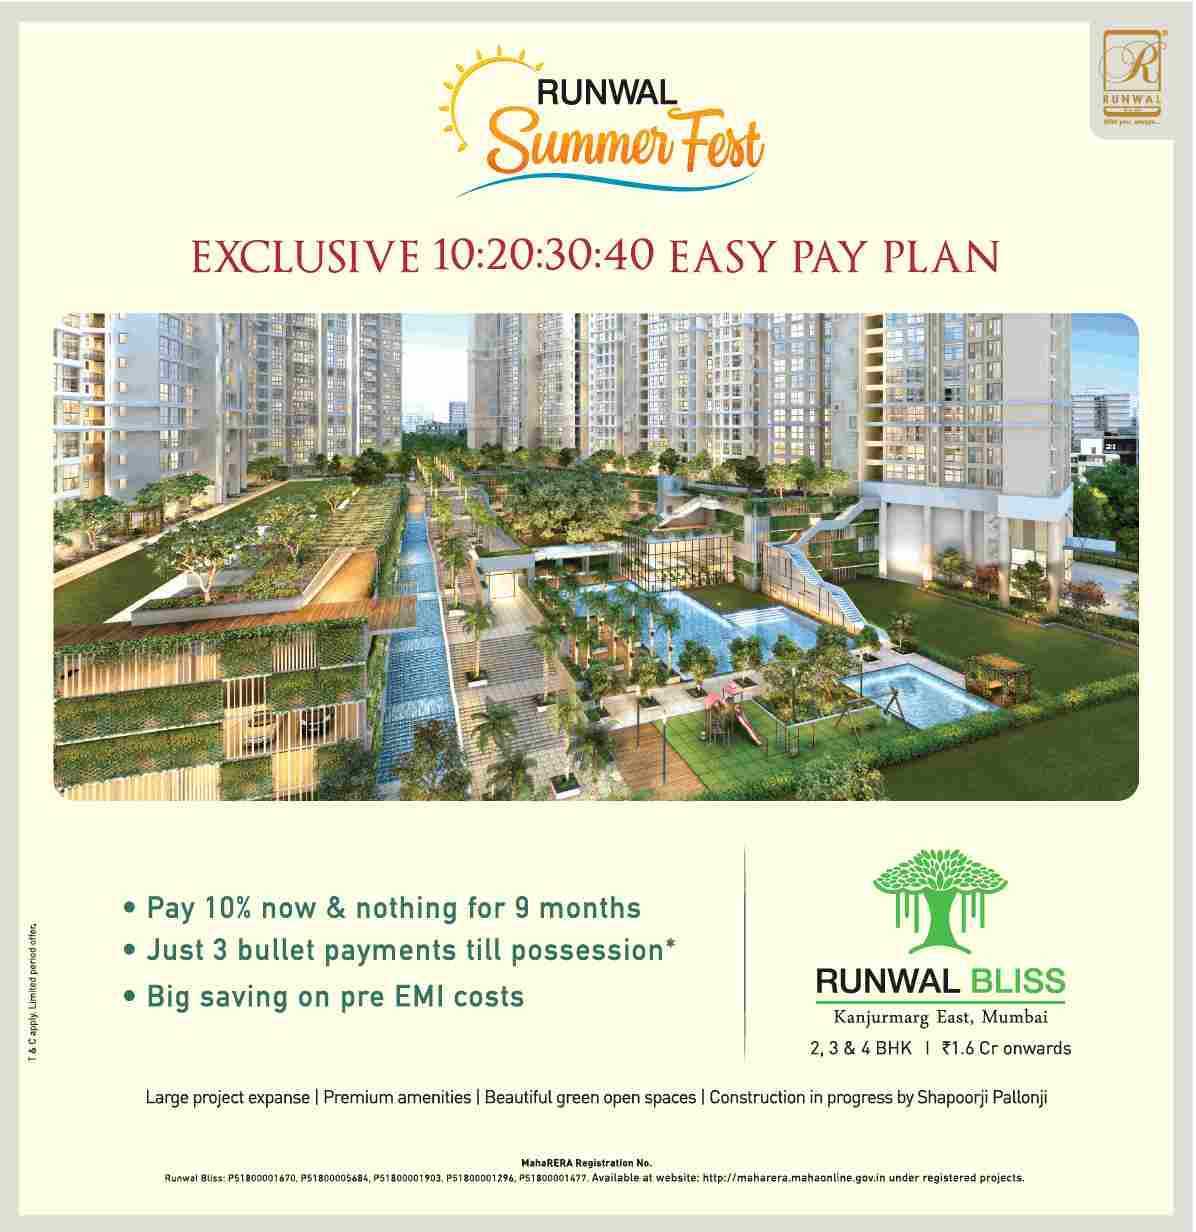 Avail the exclusive 10:20:30:40 easy pay plan at Runwal Bliss in Mumbai Update